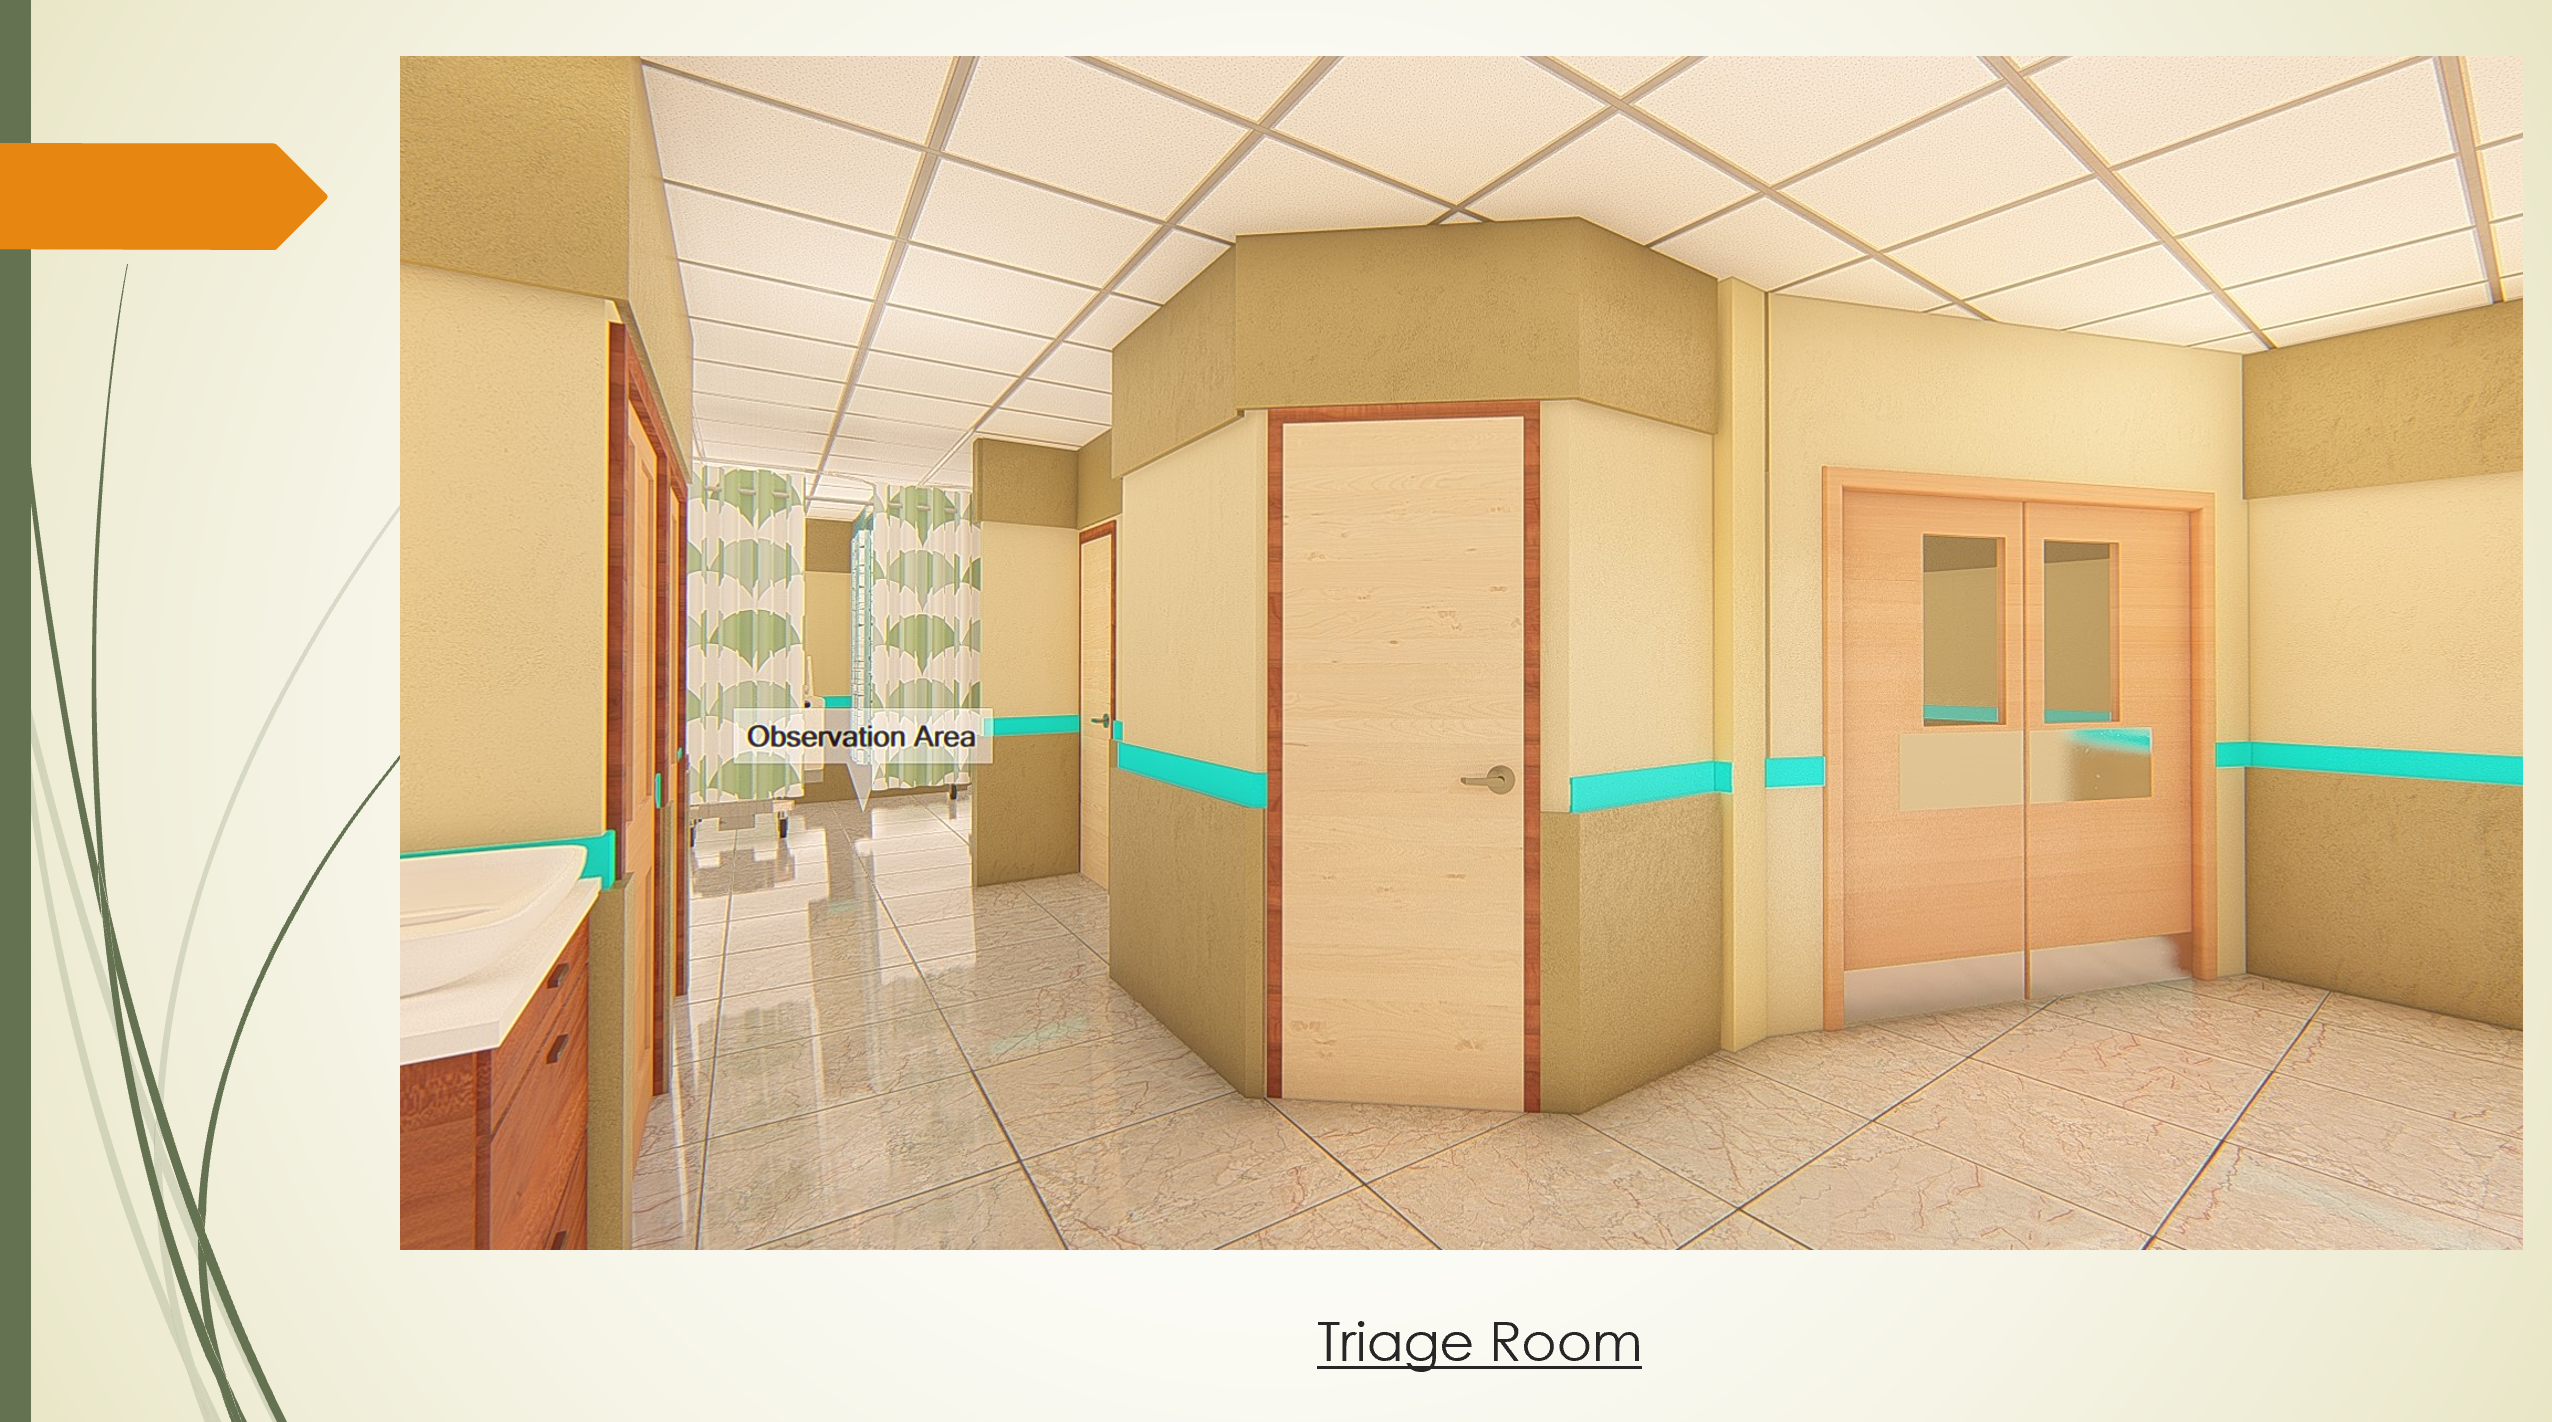 Rendering of the Triage Room for PG Community Hospital